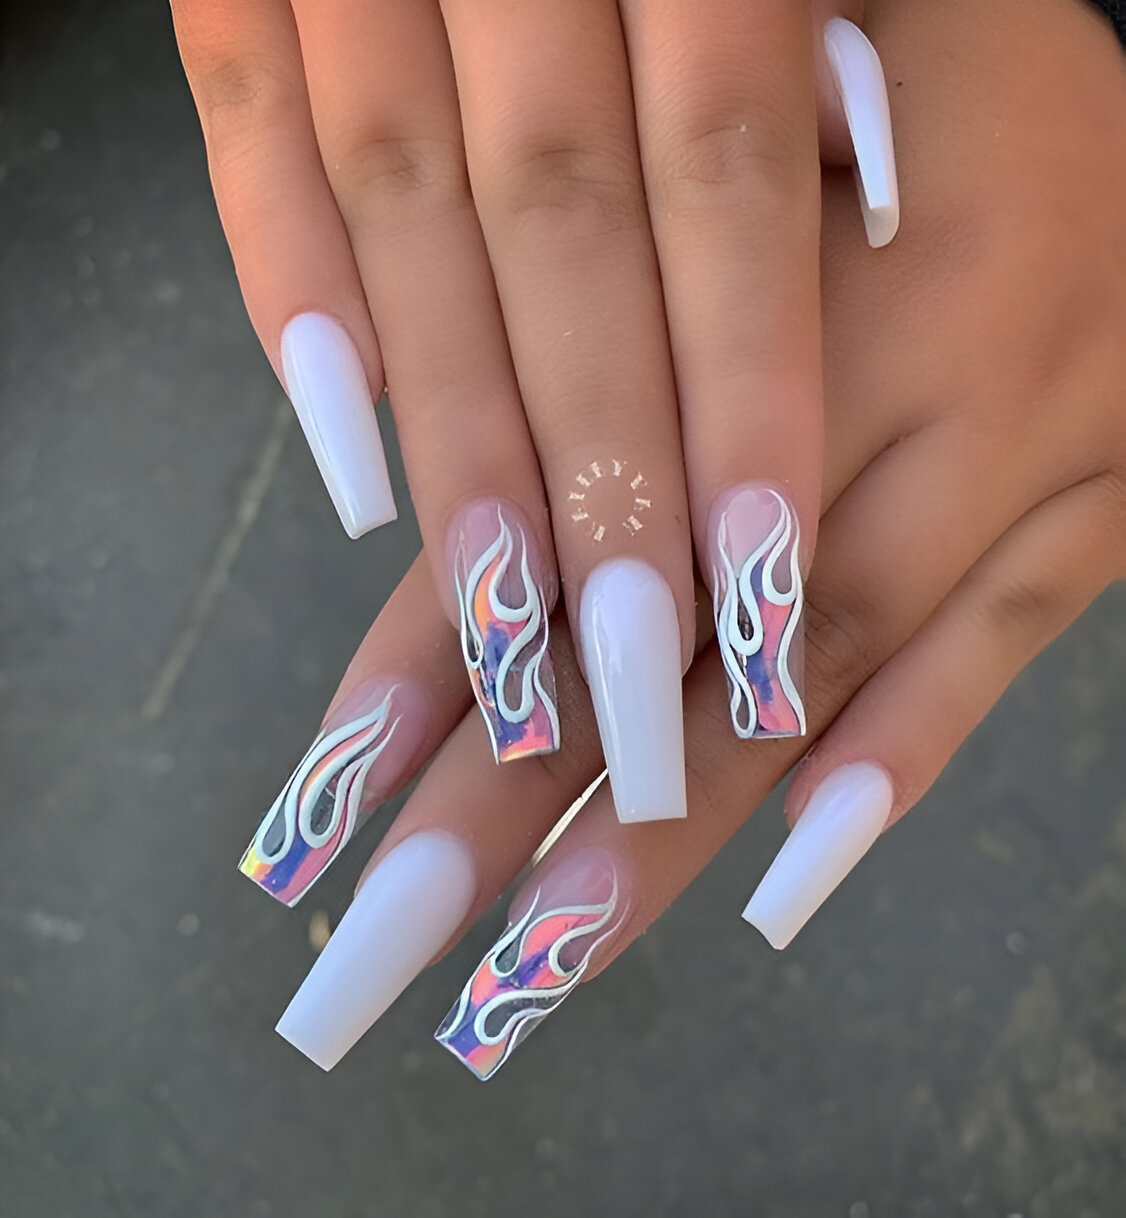 25 Fabulous Flame Nail Ideas To Make You The Hottest Girl - 181